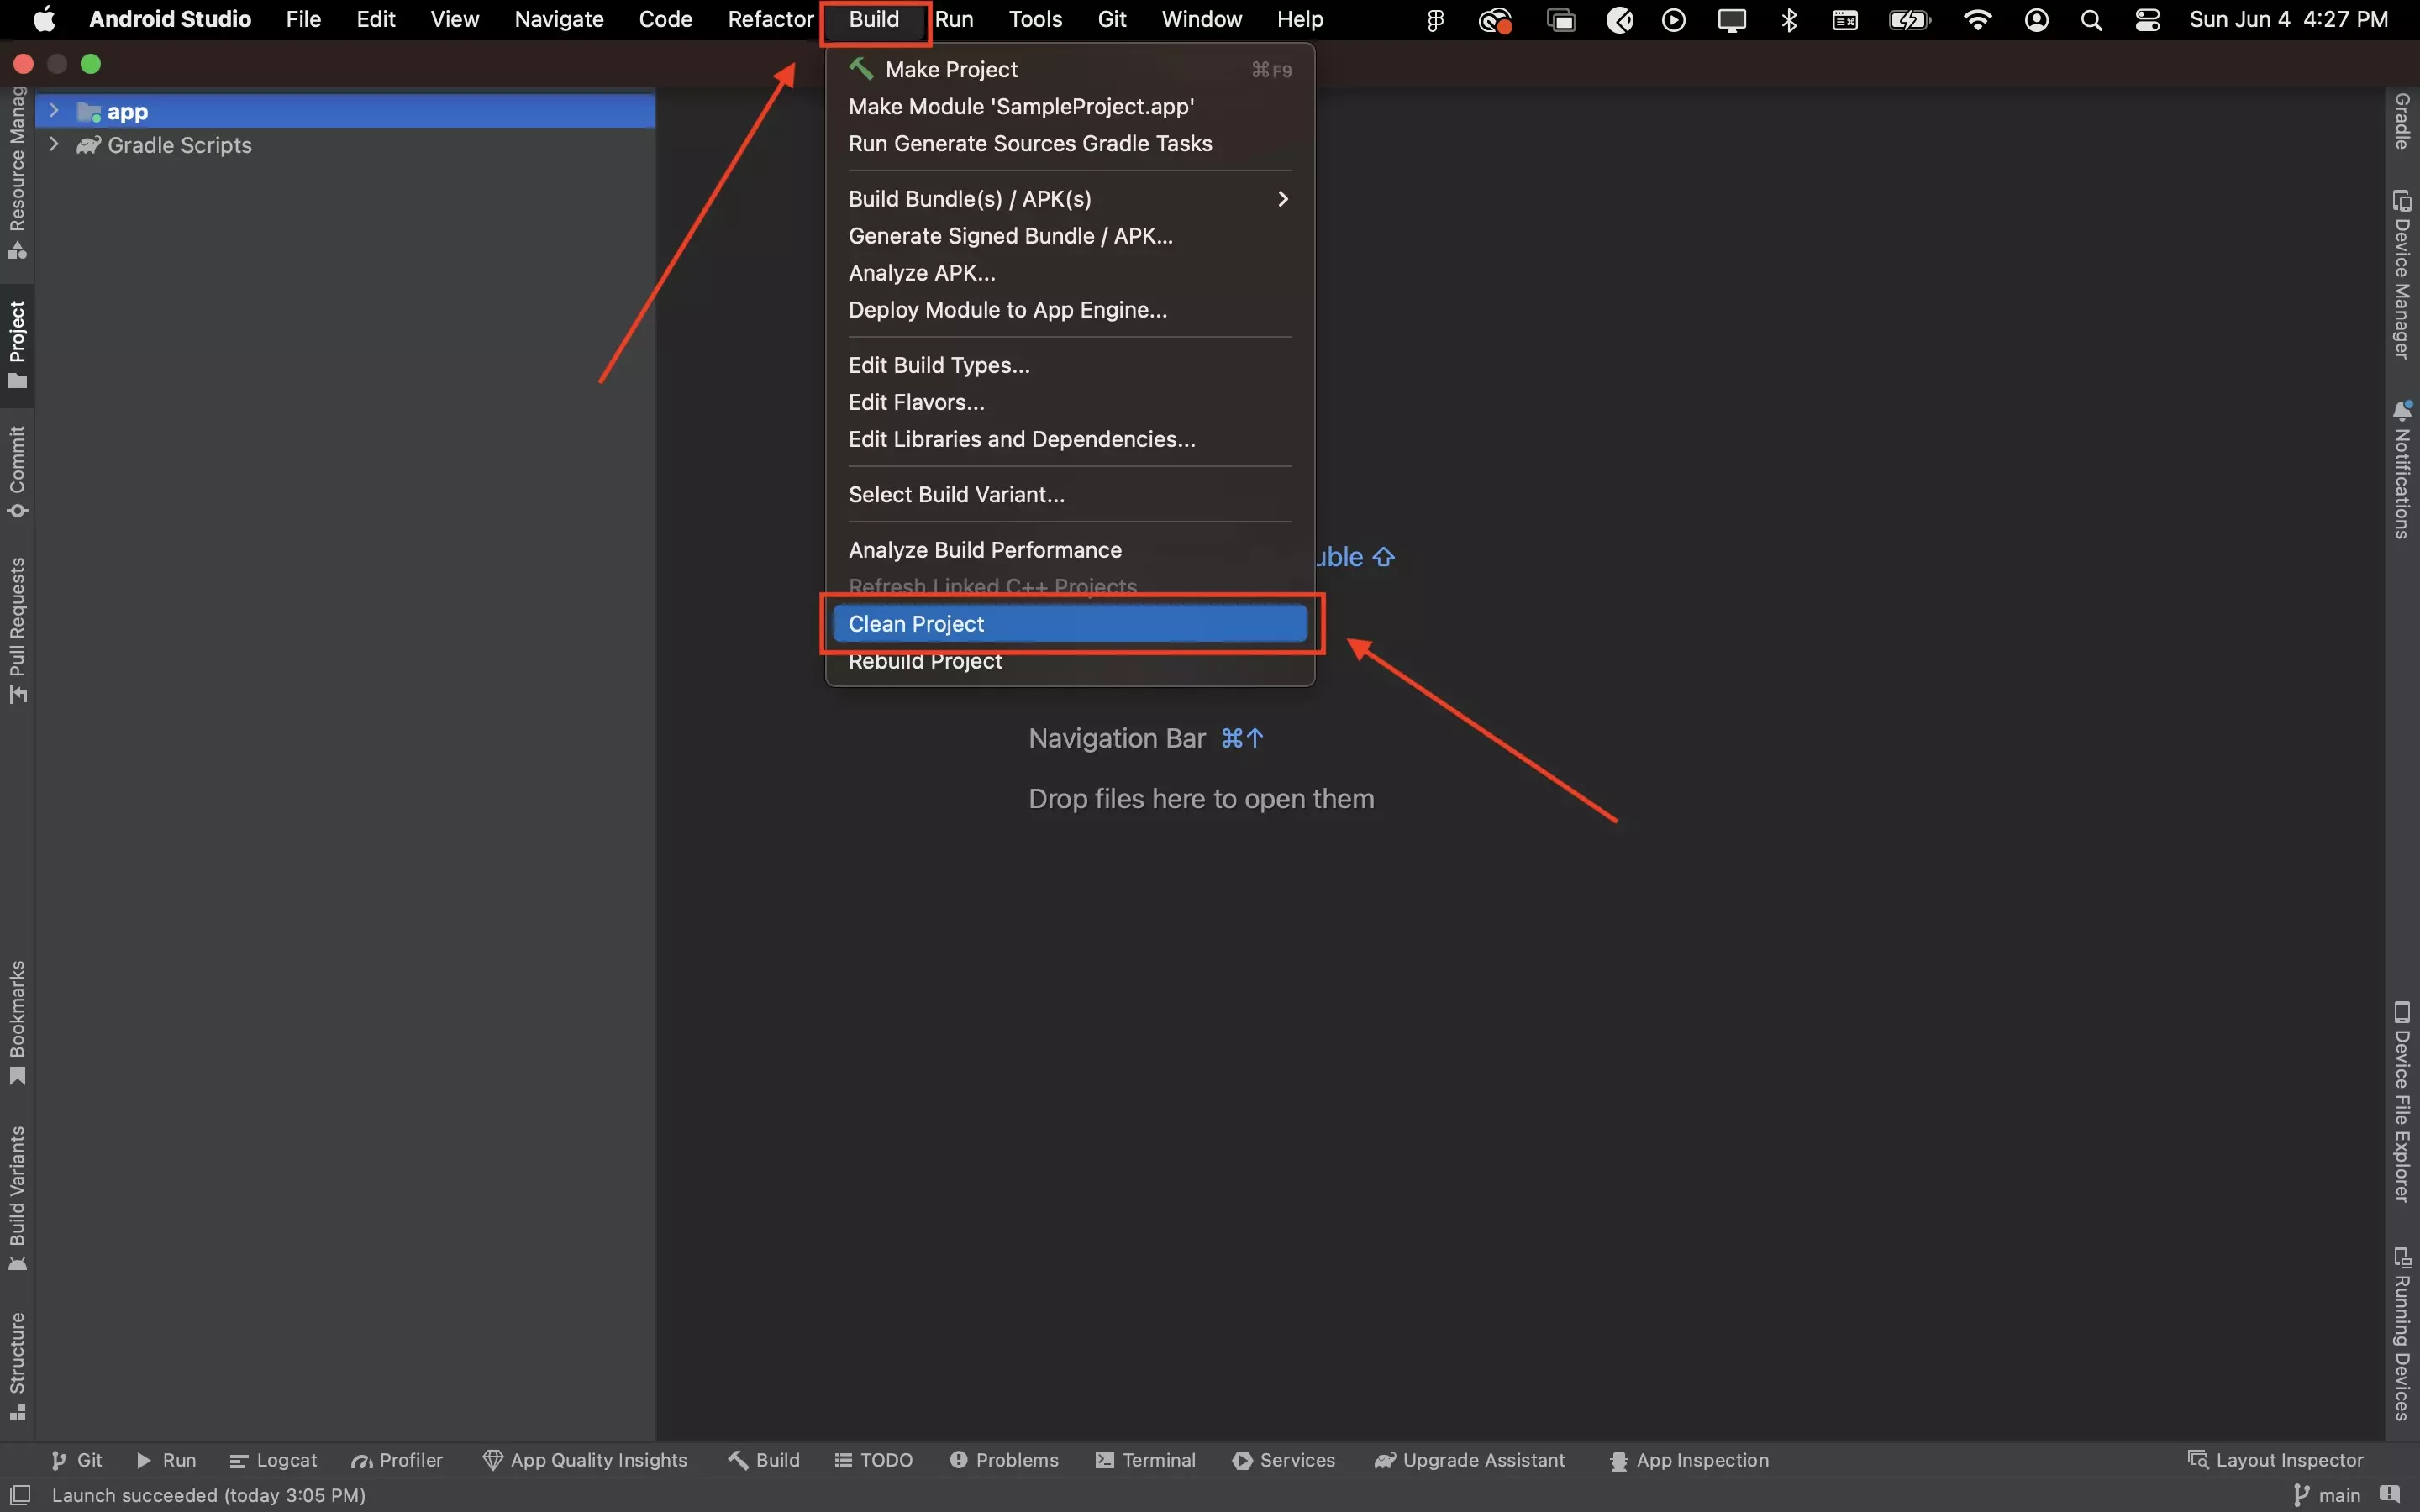 A screenshot of Android Studio show you how to clean your project. Highlighted is the Build menu and the Rebuild Project option.